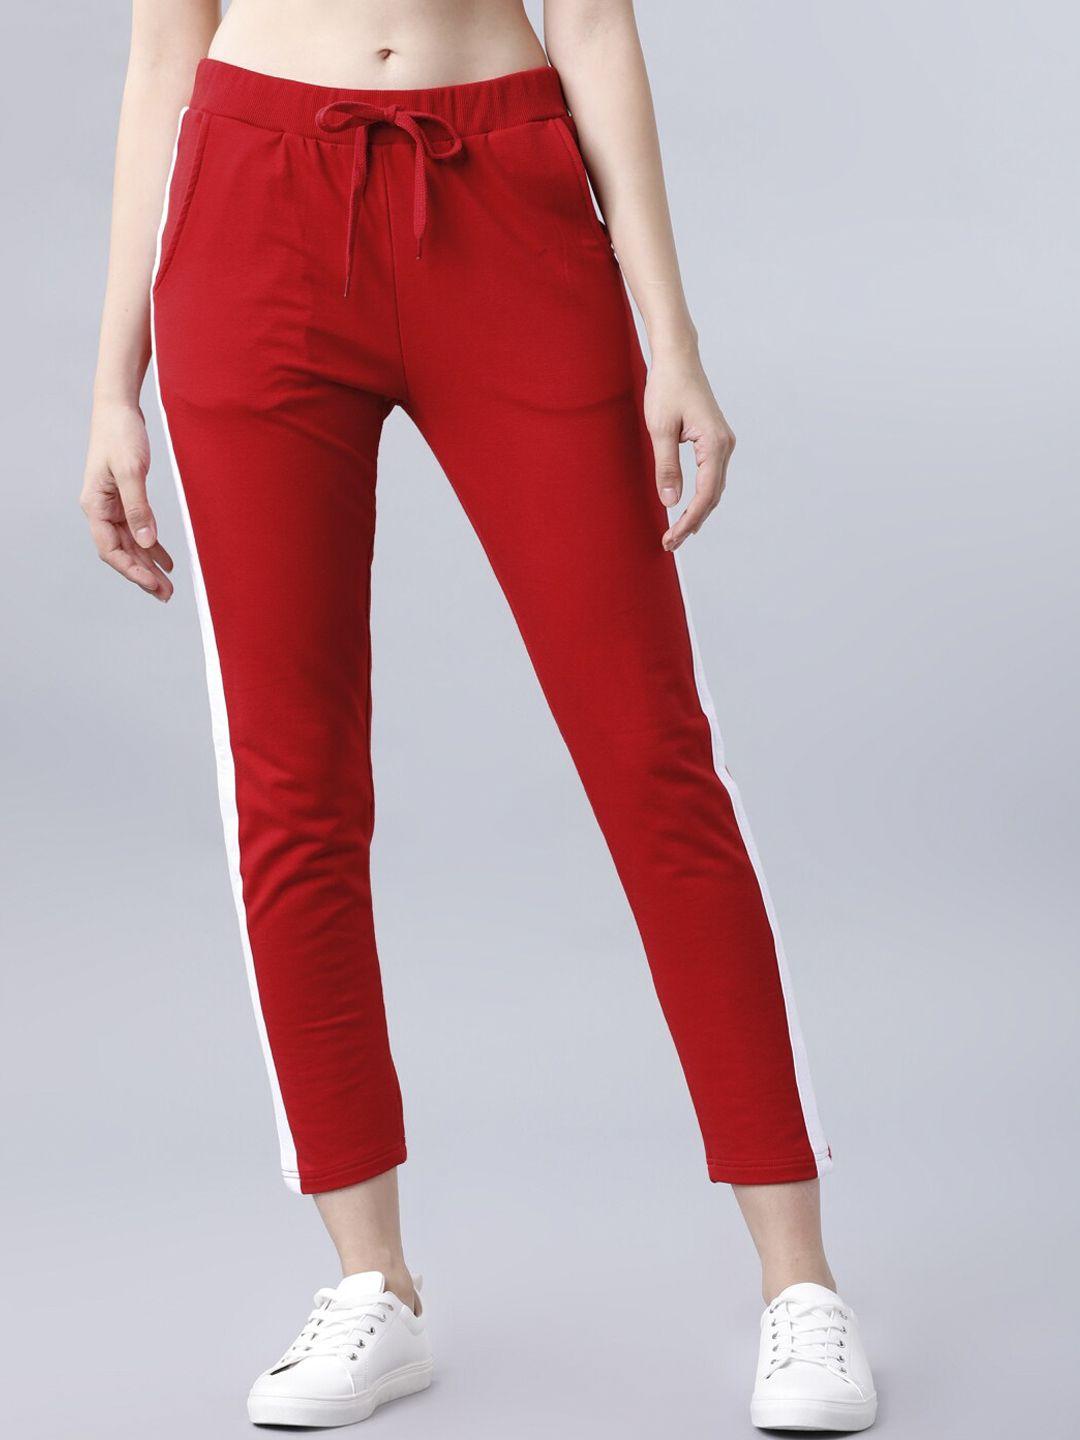 tokyo-talkies-women-red-solid-casual-track-pant